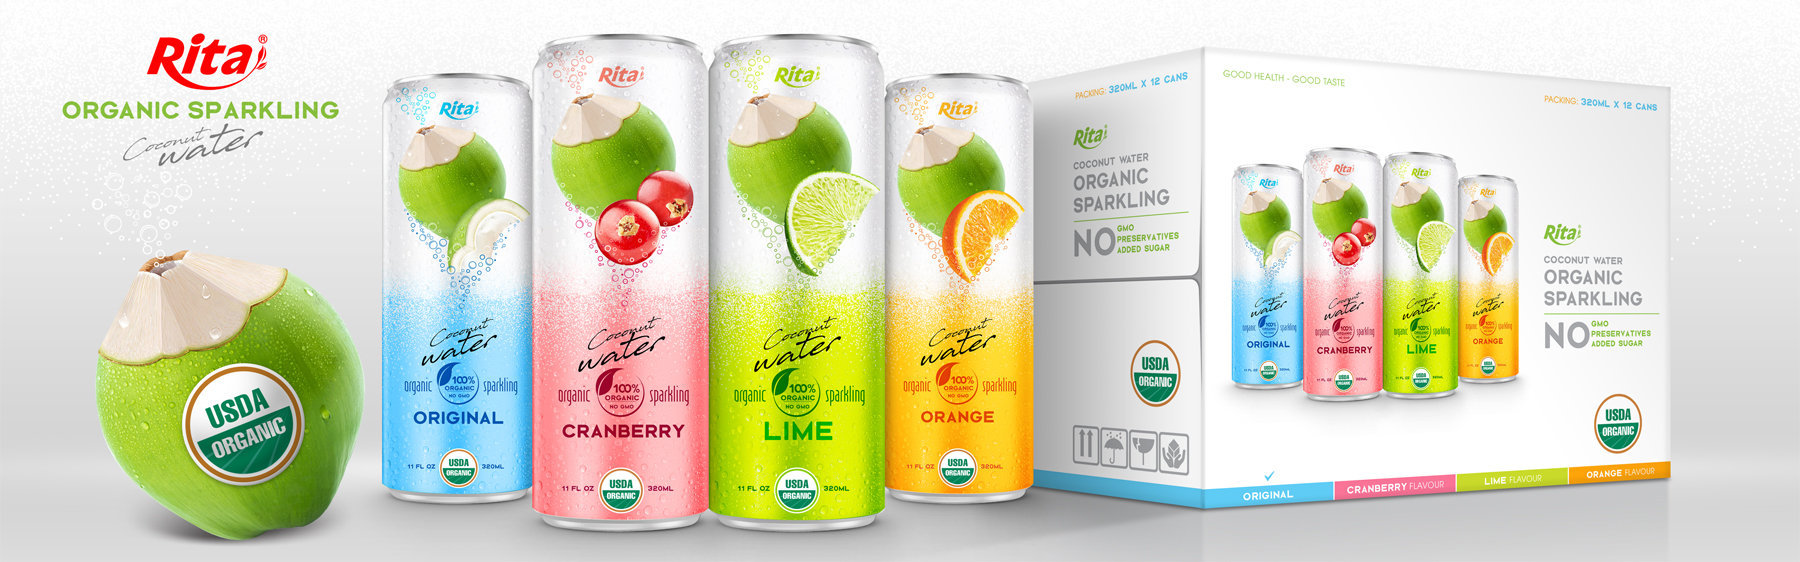 Coco Organic Sparkling 320ml can_01